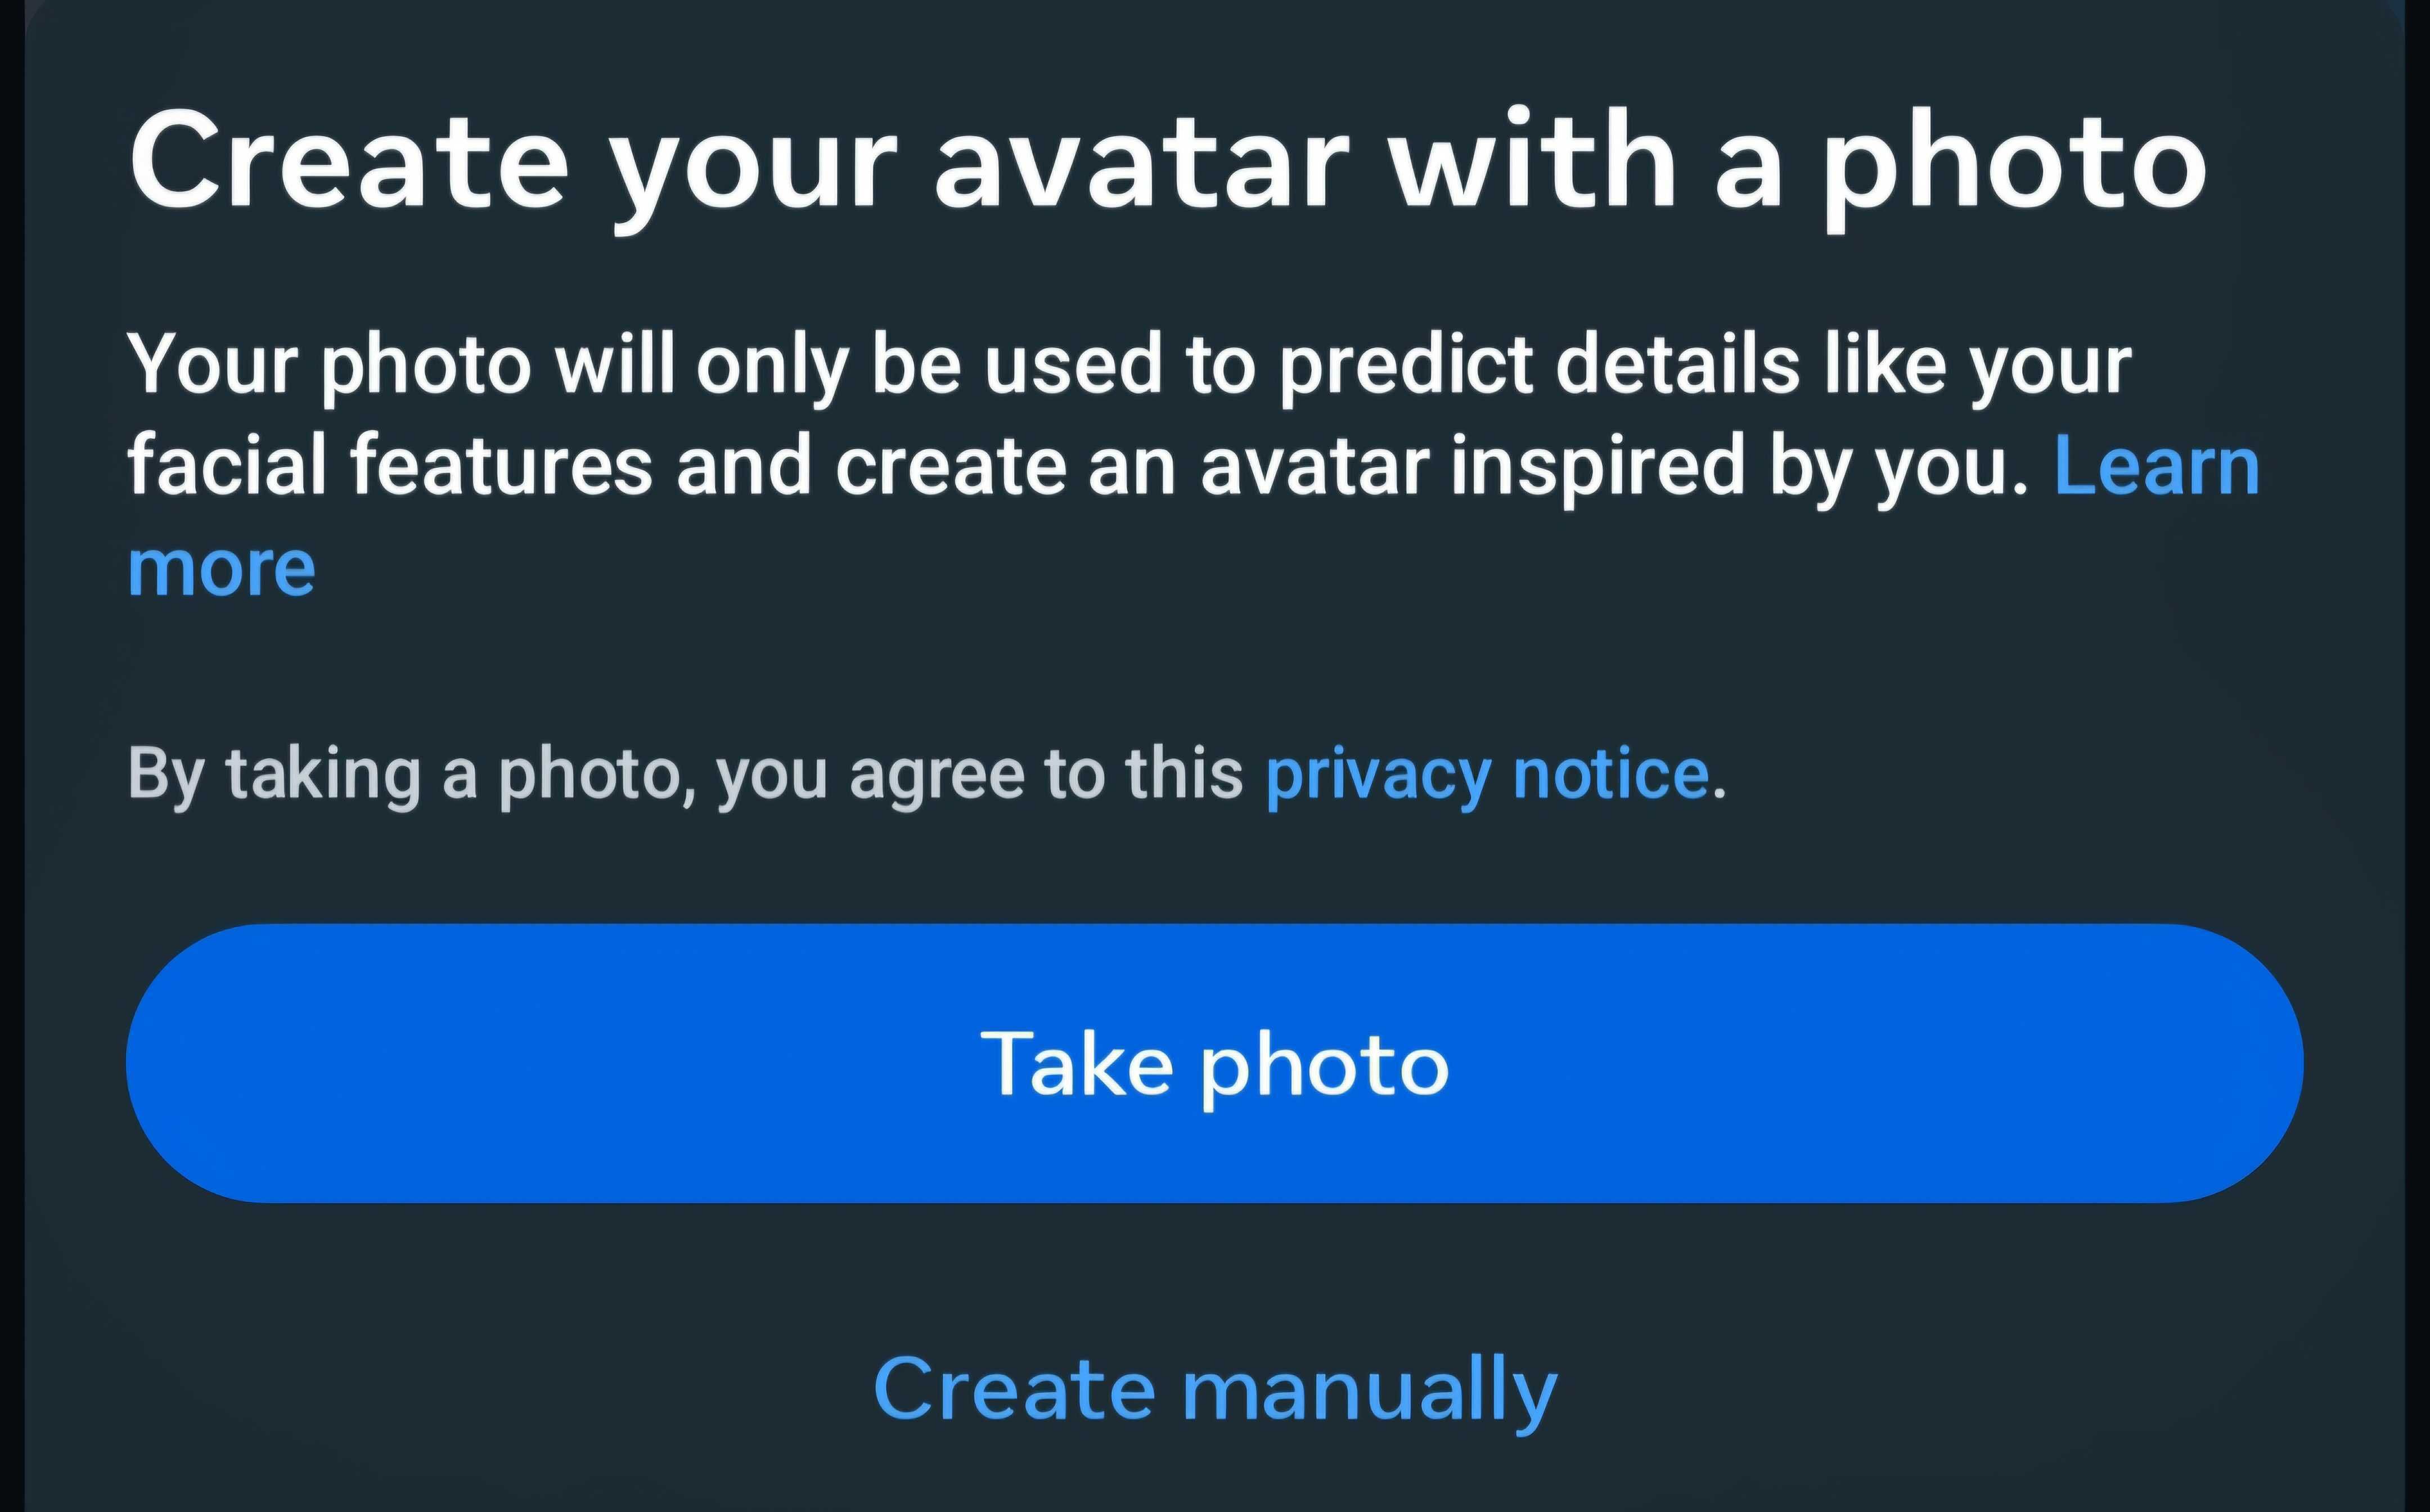 Options to create an avatar manually or automatically